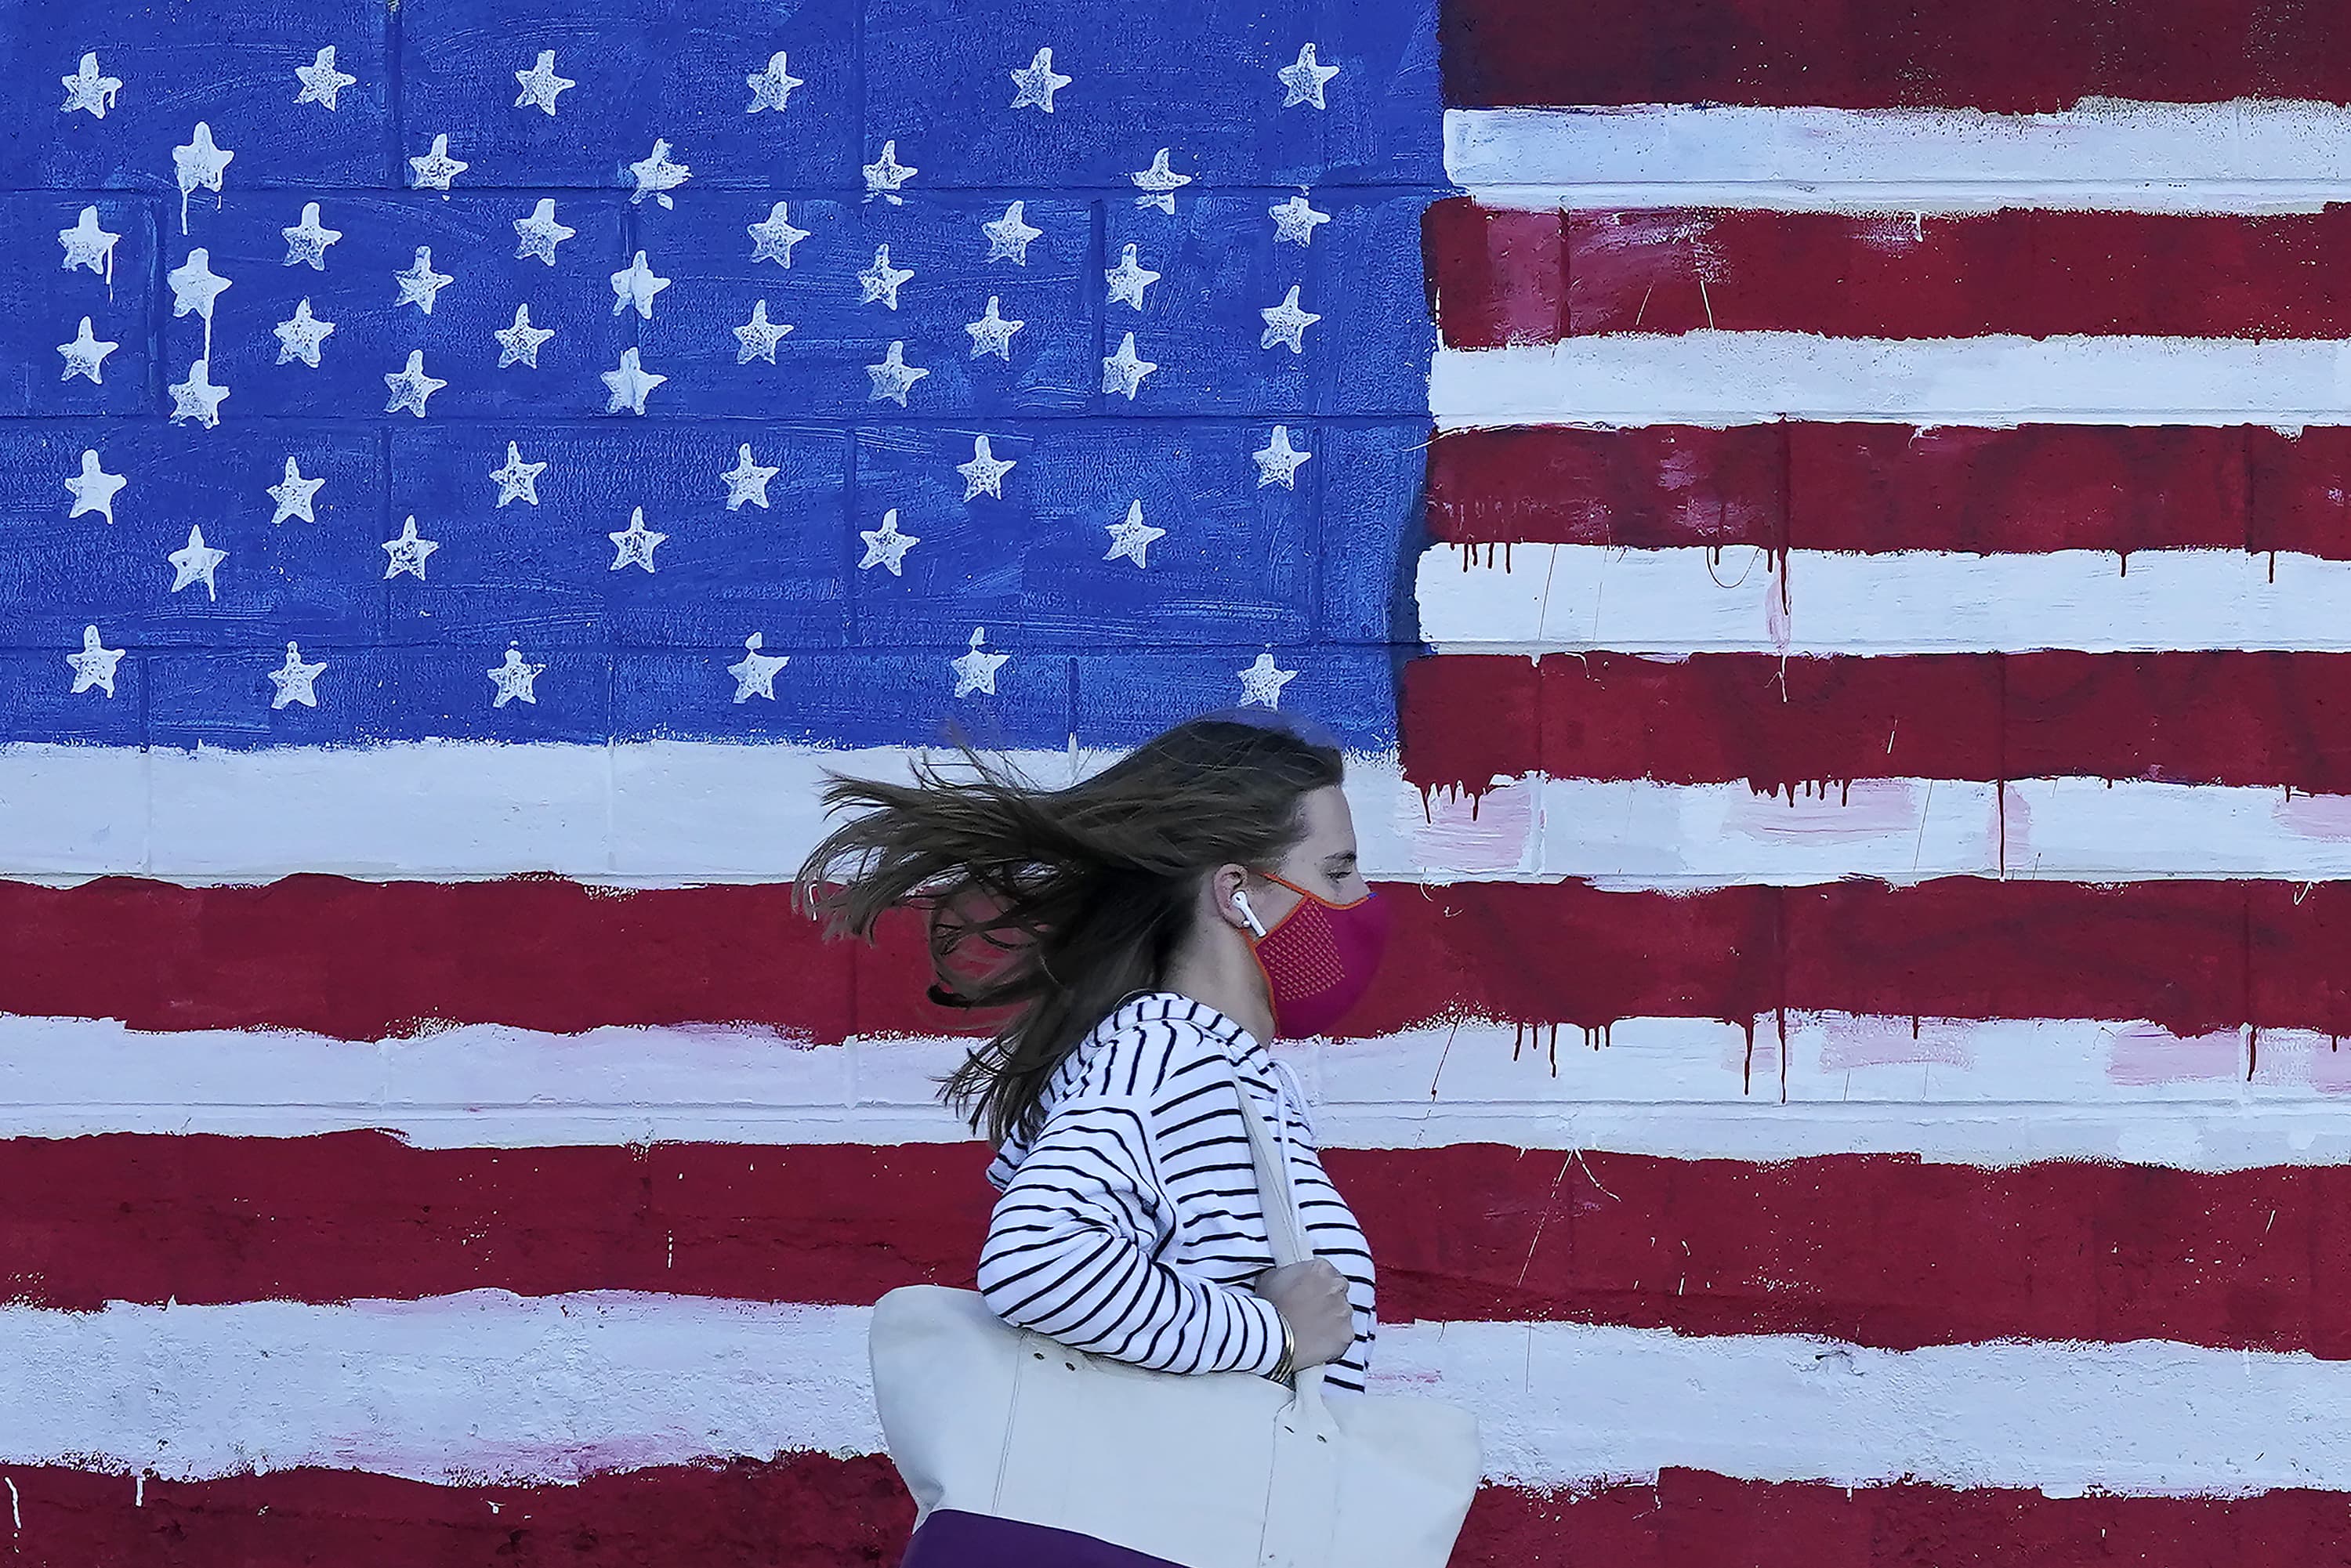 A woman wears a mask while walking past a U.S. flag painted on a wall during the pandemic in San Francisco on Nov. 16, 2020. (Jeff Chiu/AP)